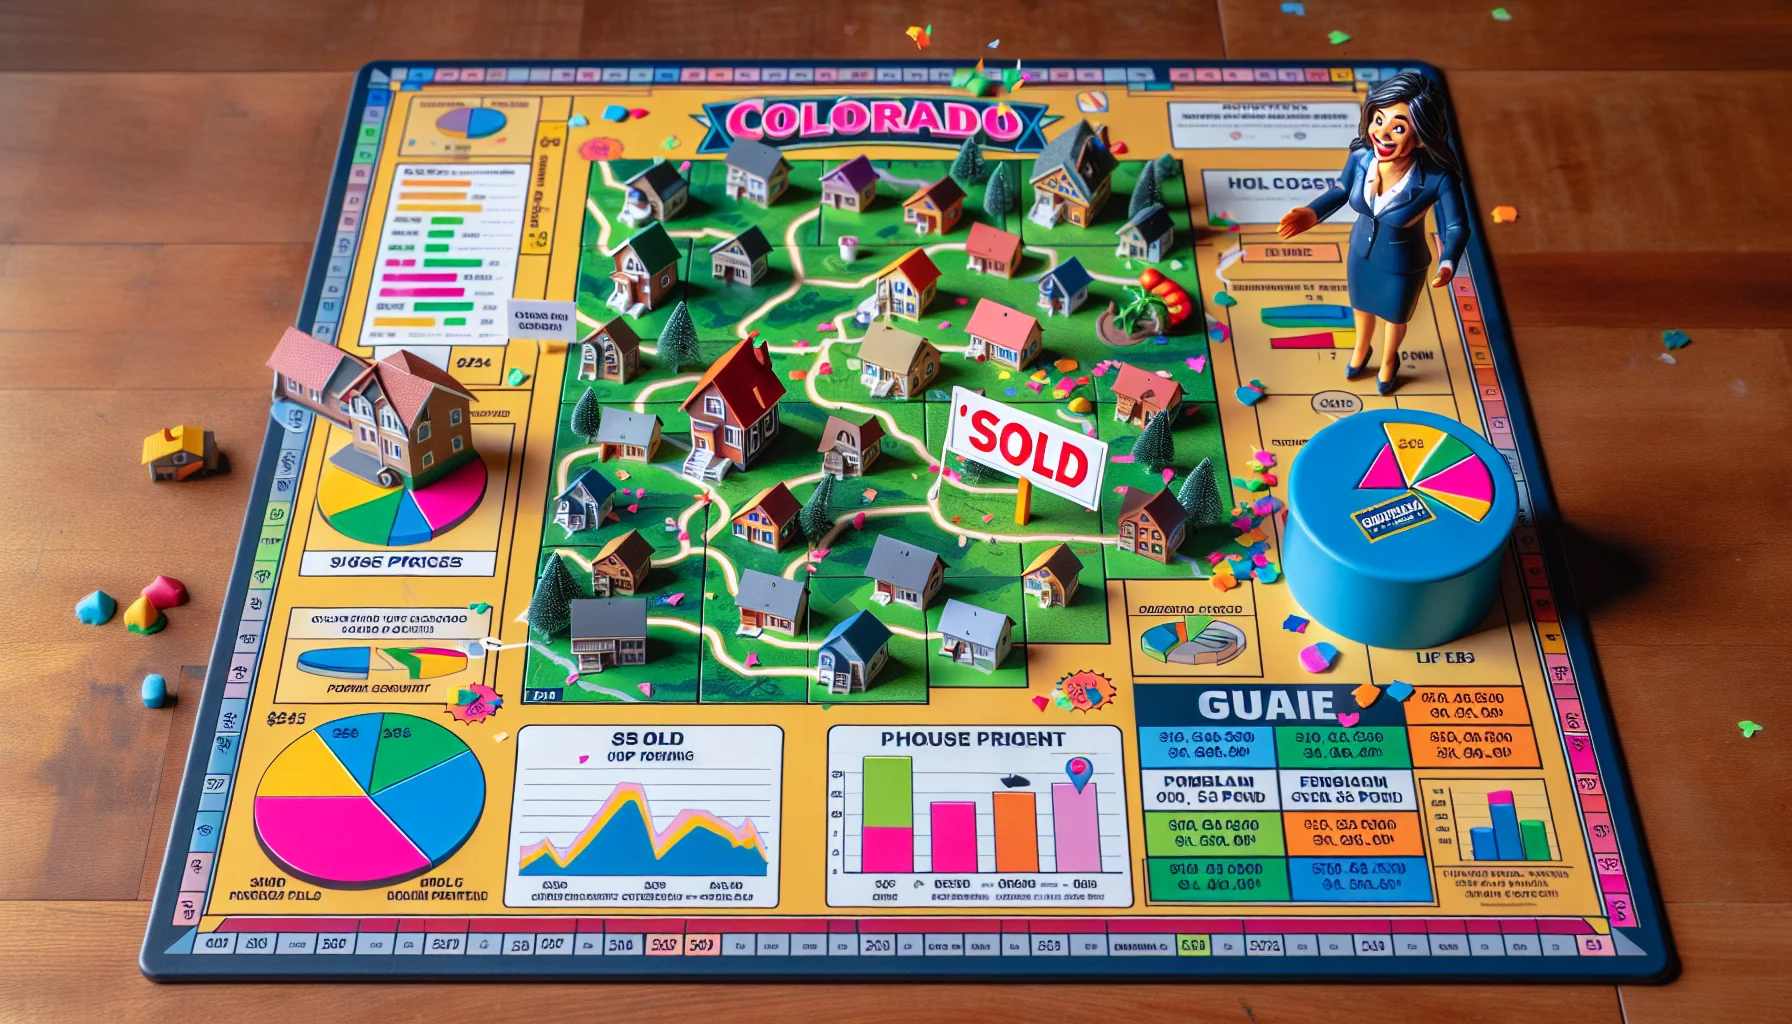 Imagine a board game-style depiction of the Colorado housing market in 2024 at its most ideal. The board shows a large, colorful map of Colorado with miniature houses, shops, and parks covering the state. There are pie charts and playful, colorful infographics scattered across the map showing surges in house prices, population, and economic growth. A pair of hands are shown placing a 'Sold' sign on a miniature dream house. On the side of the image, there is a comical character, an optimistic South Asian woman wearing a realtor's blazer, laughing and throwing confetti into the air.